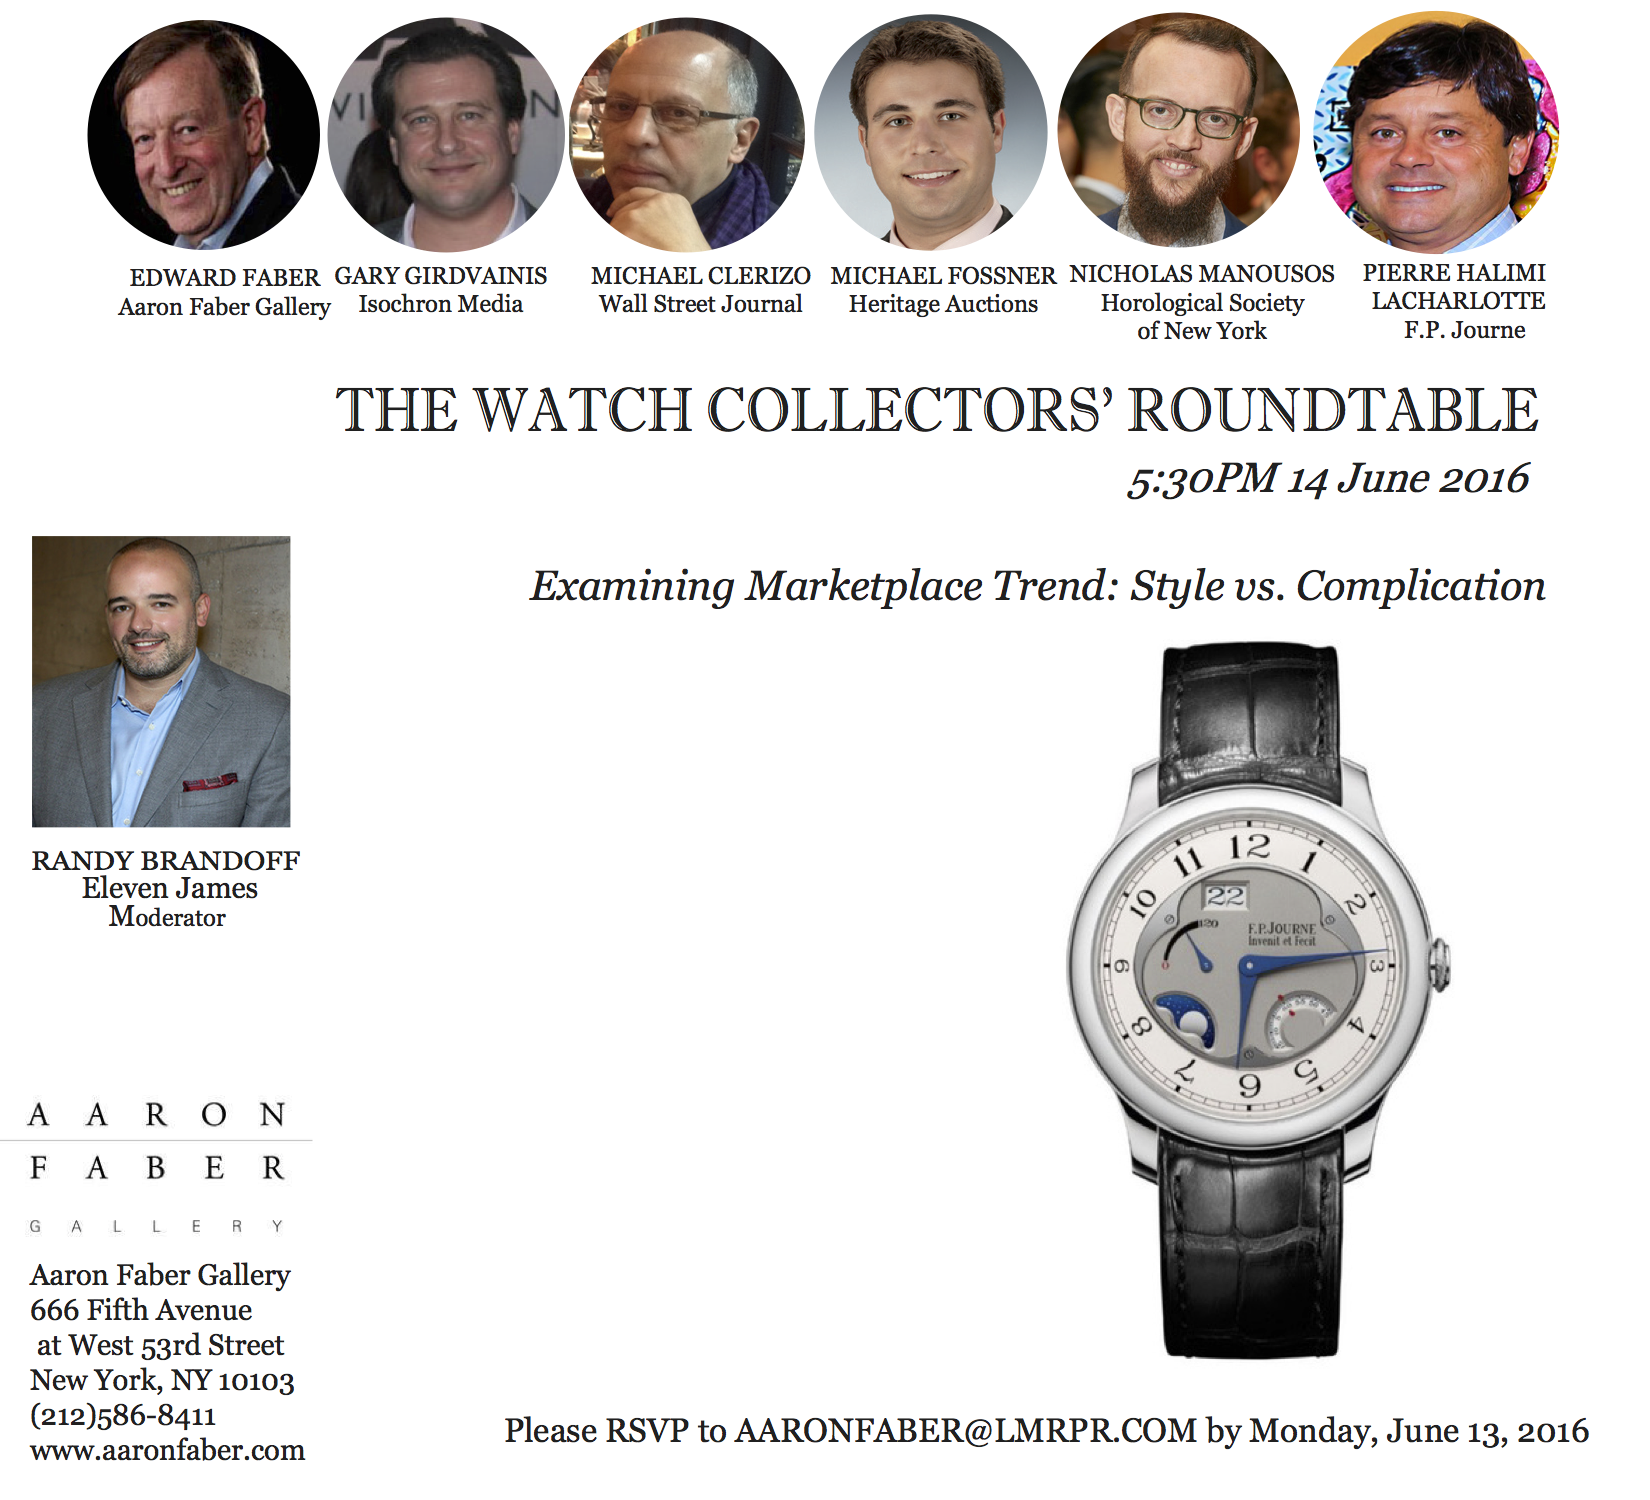 Aaron Faber Gallery's 4th Annual Watch Collectors' Roundtable